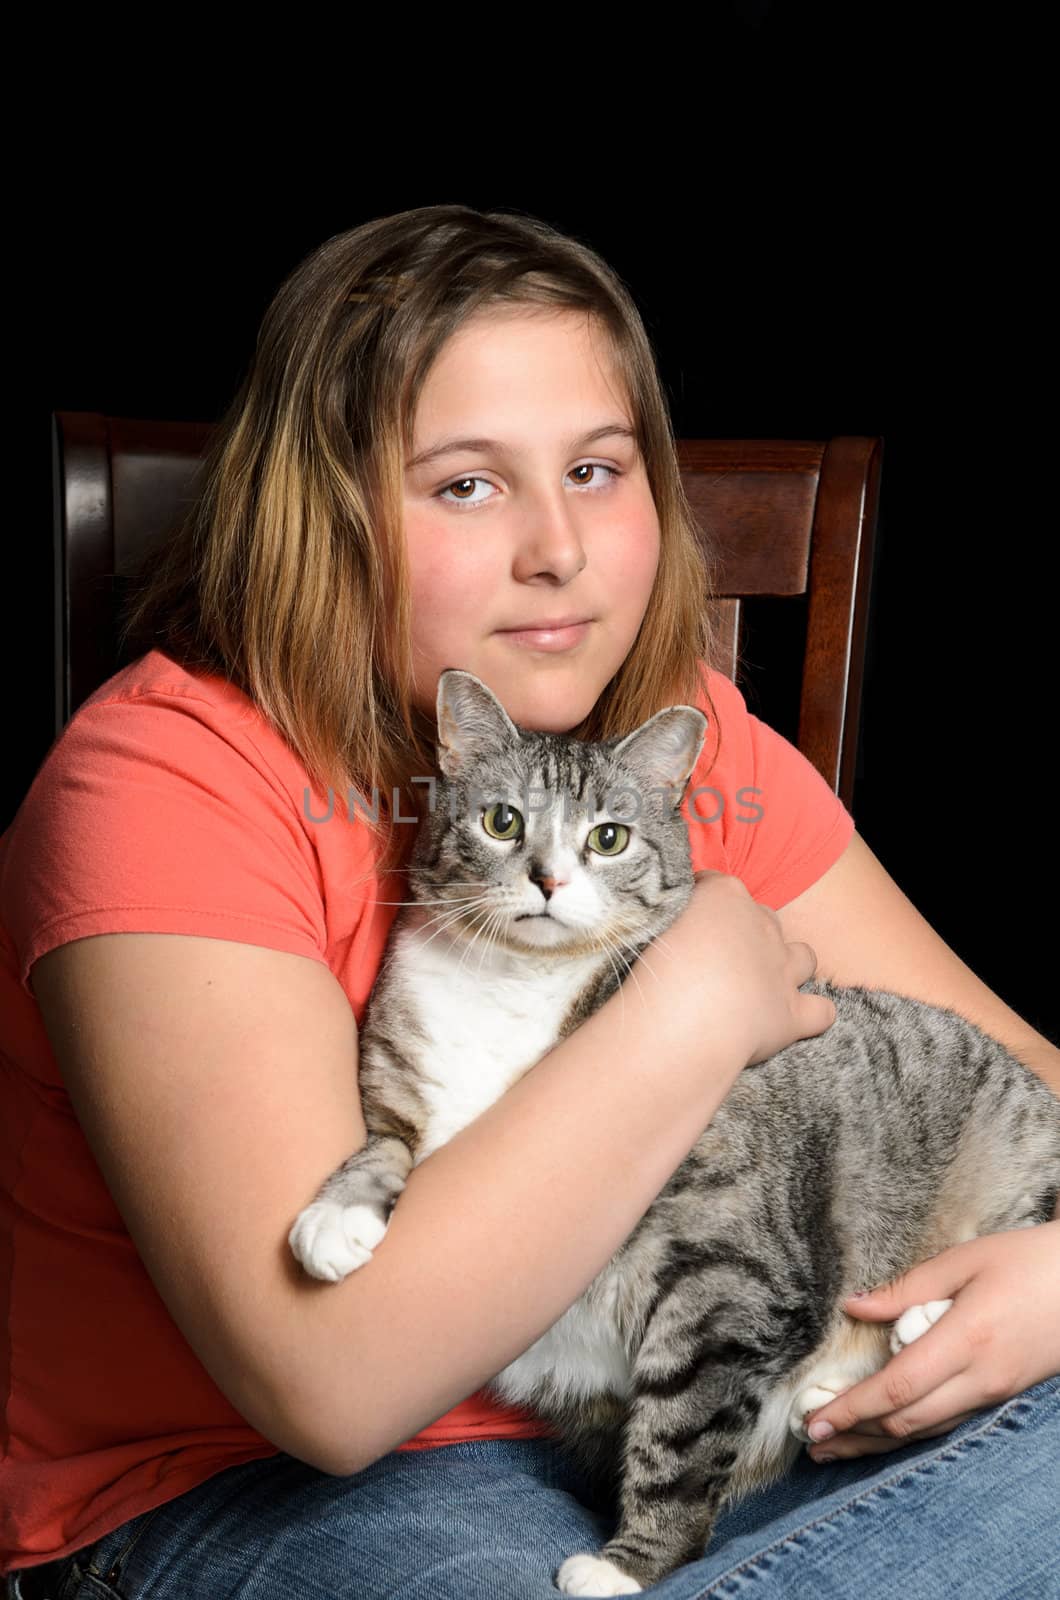 A young girl holding her pet cat, while sitting on a chair, isolated against a black background.